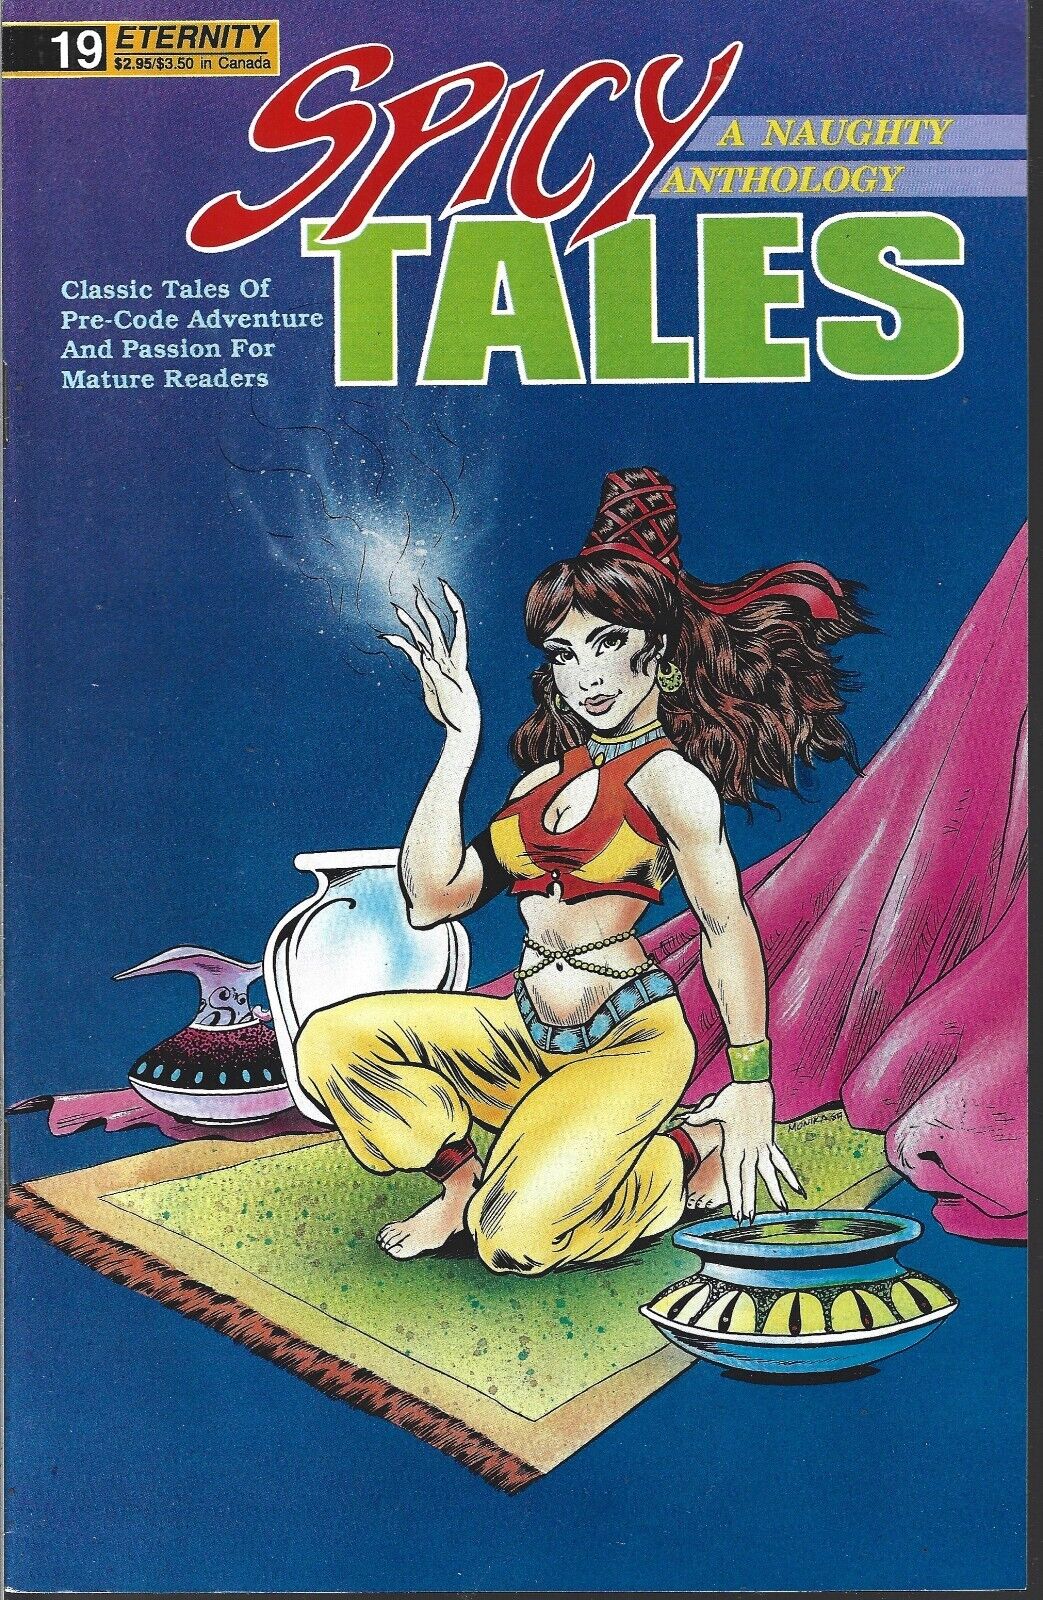 SPICY TALES #19 (VF) COPPER AGE ETERNITY COMICS, A NAUGHTY ANTHOLOGY